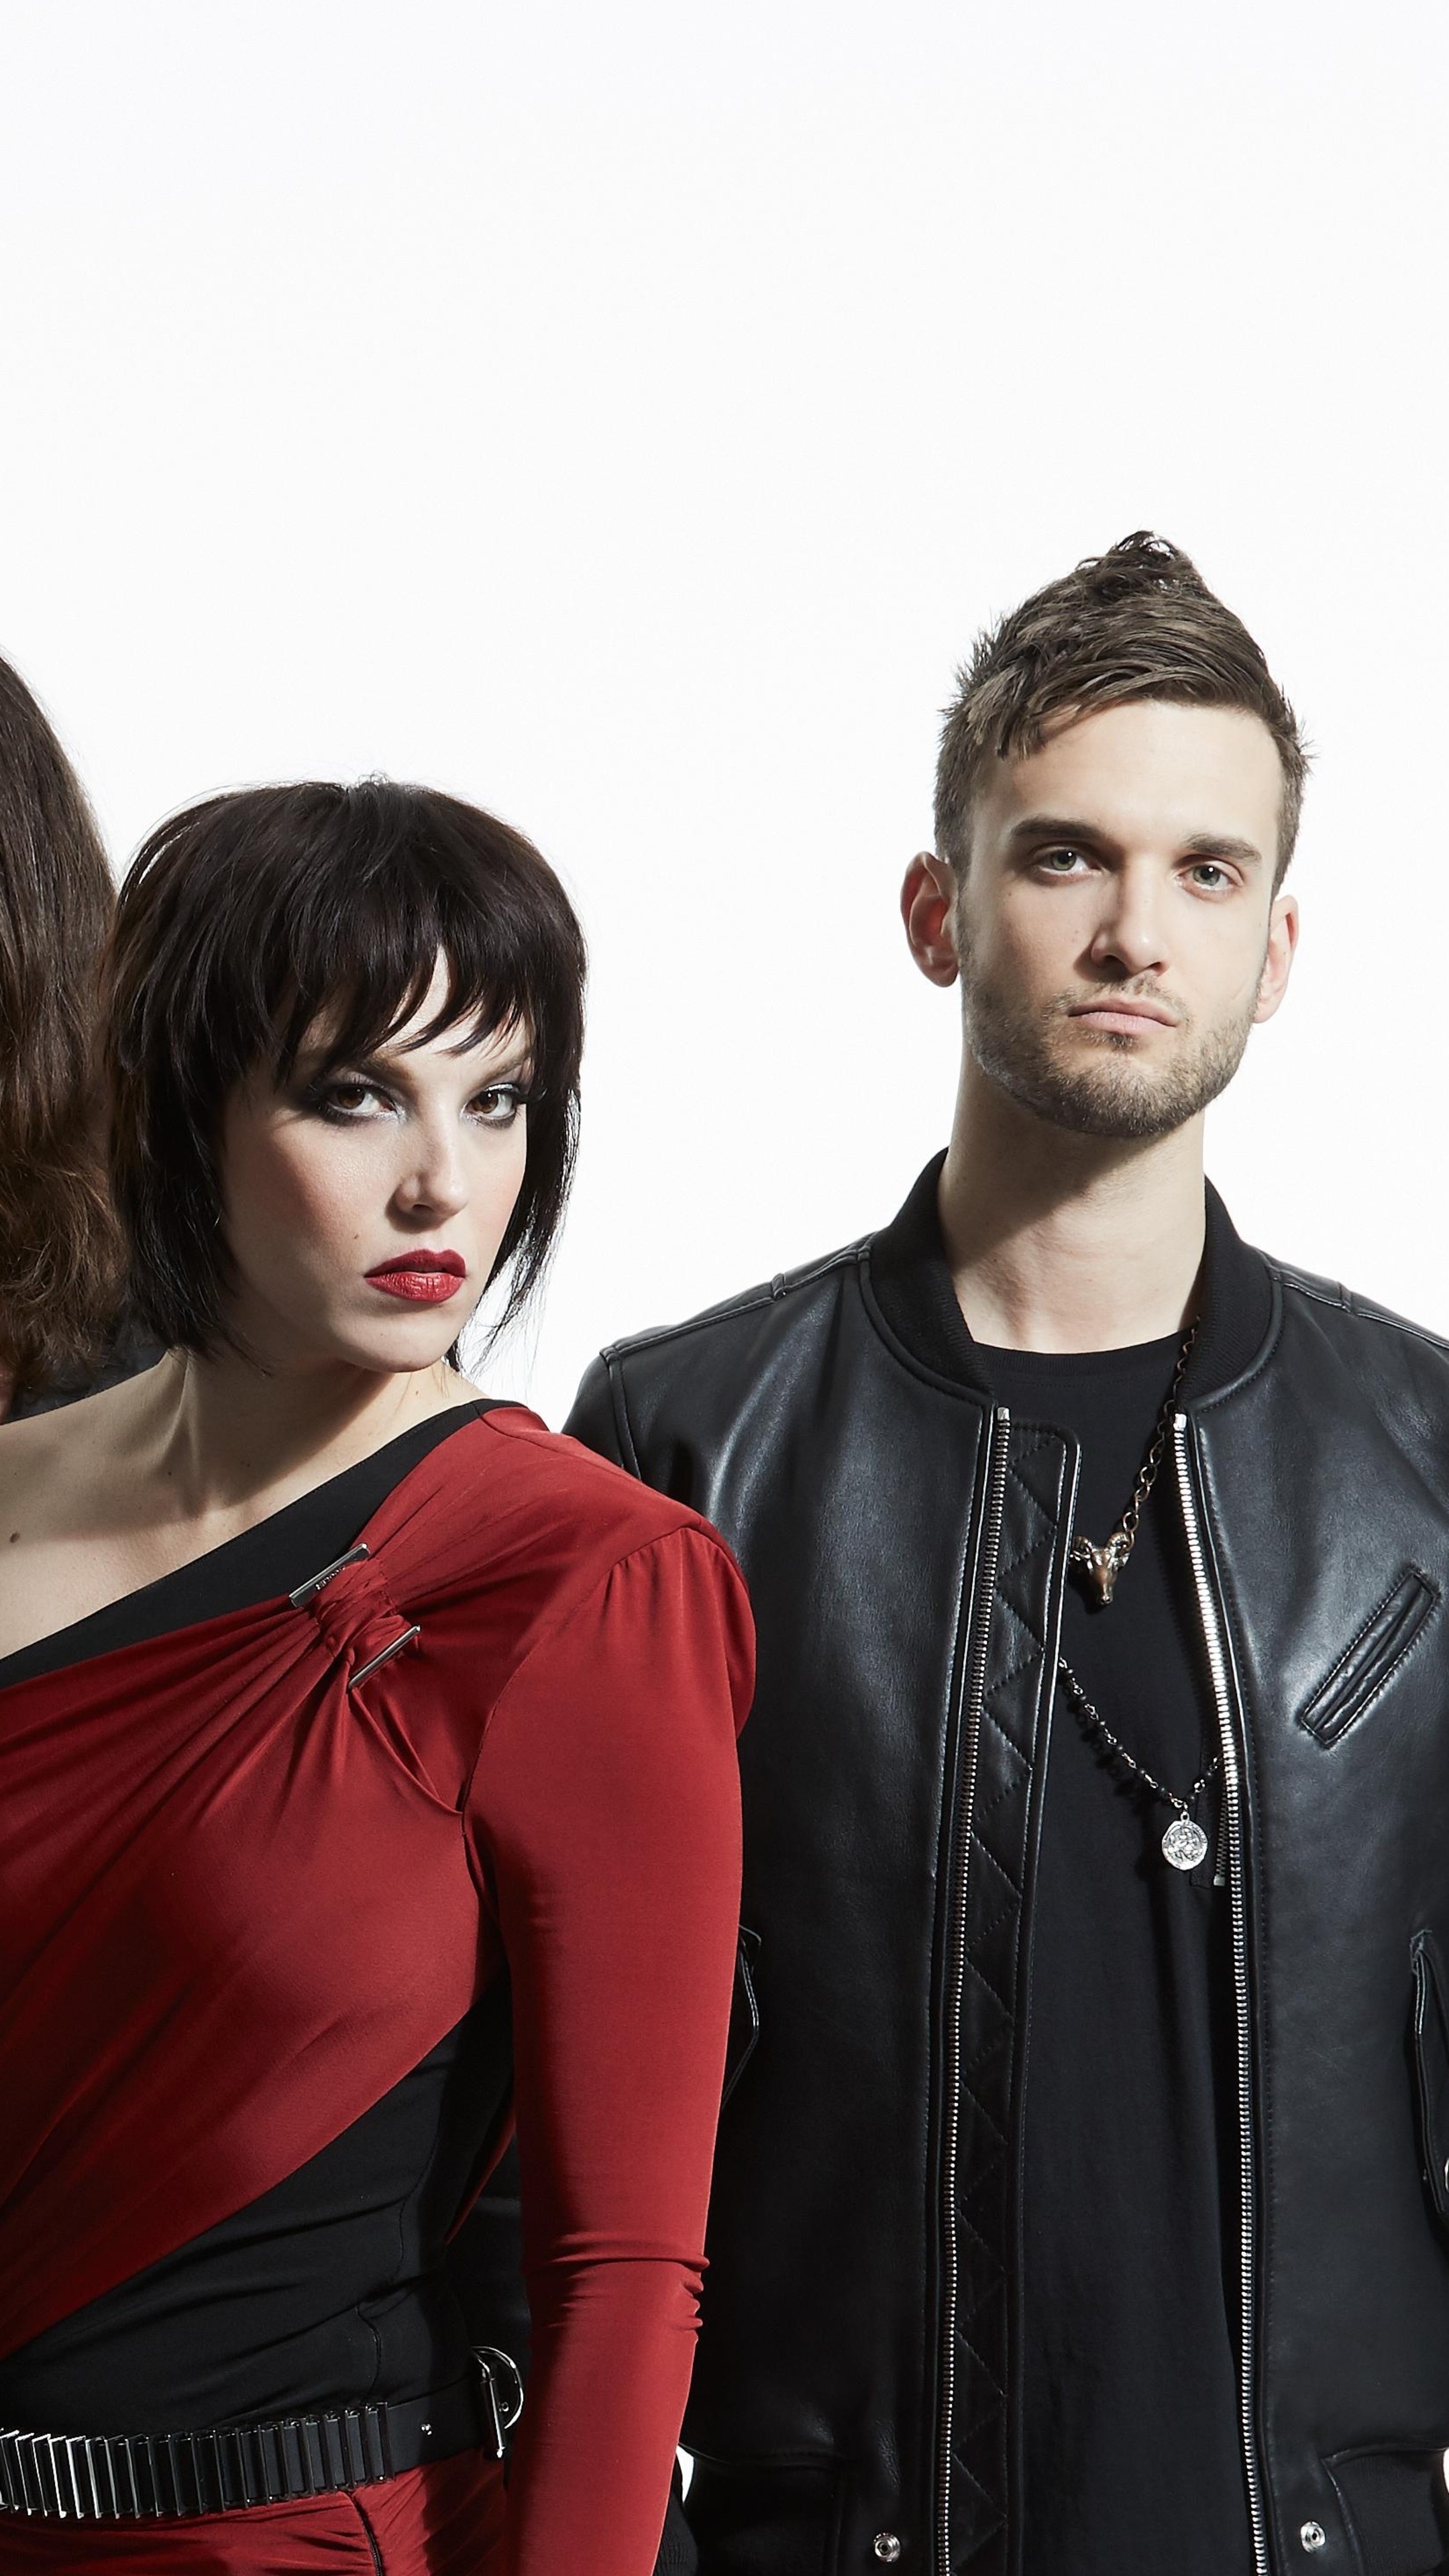 Music Band: Halestorm, An American rock ensemble from Red Lion, Pennsylvania, Lzzy Hale, Arejay Hale. 2160x3840 4K Background.